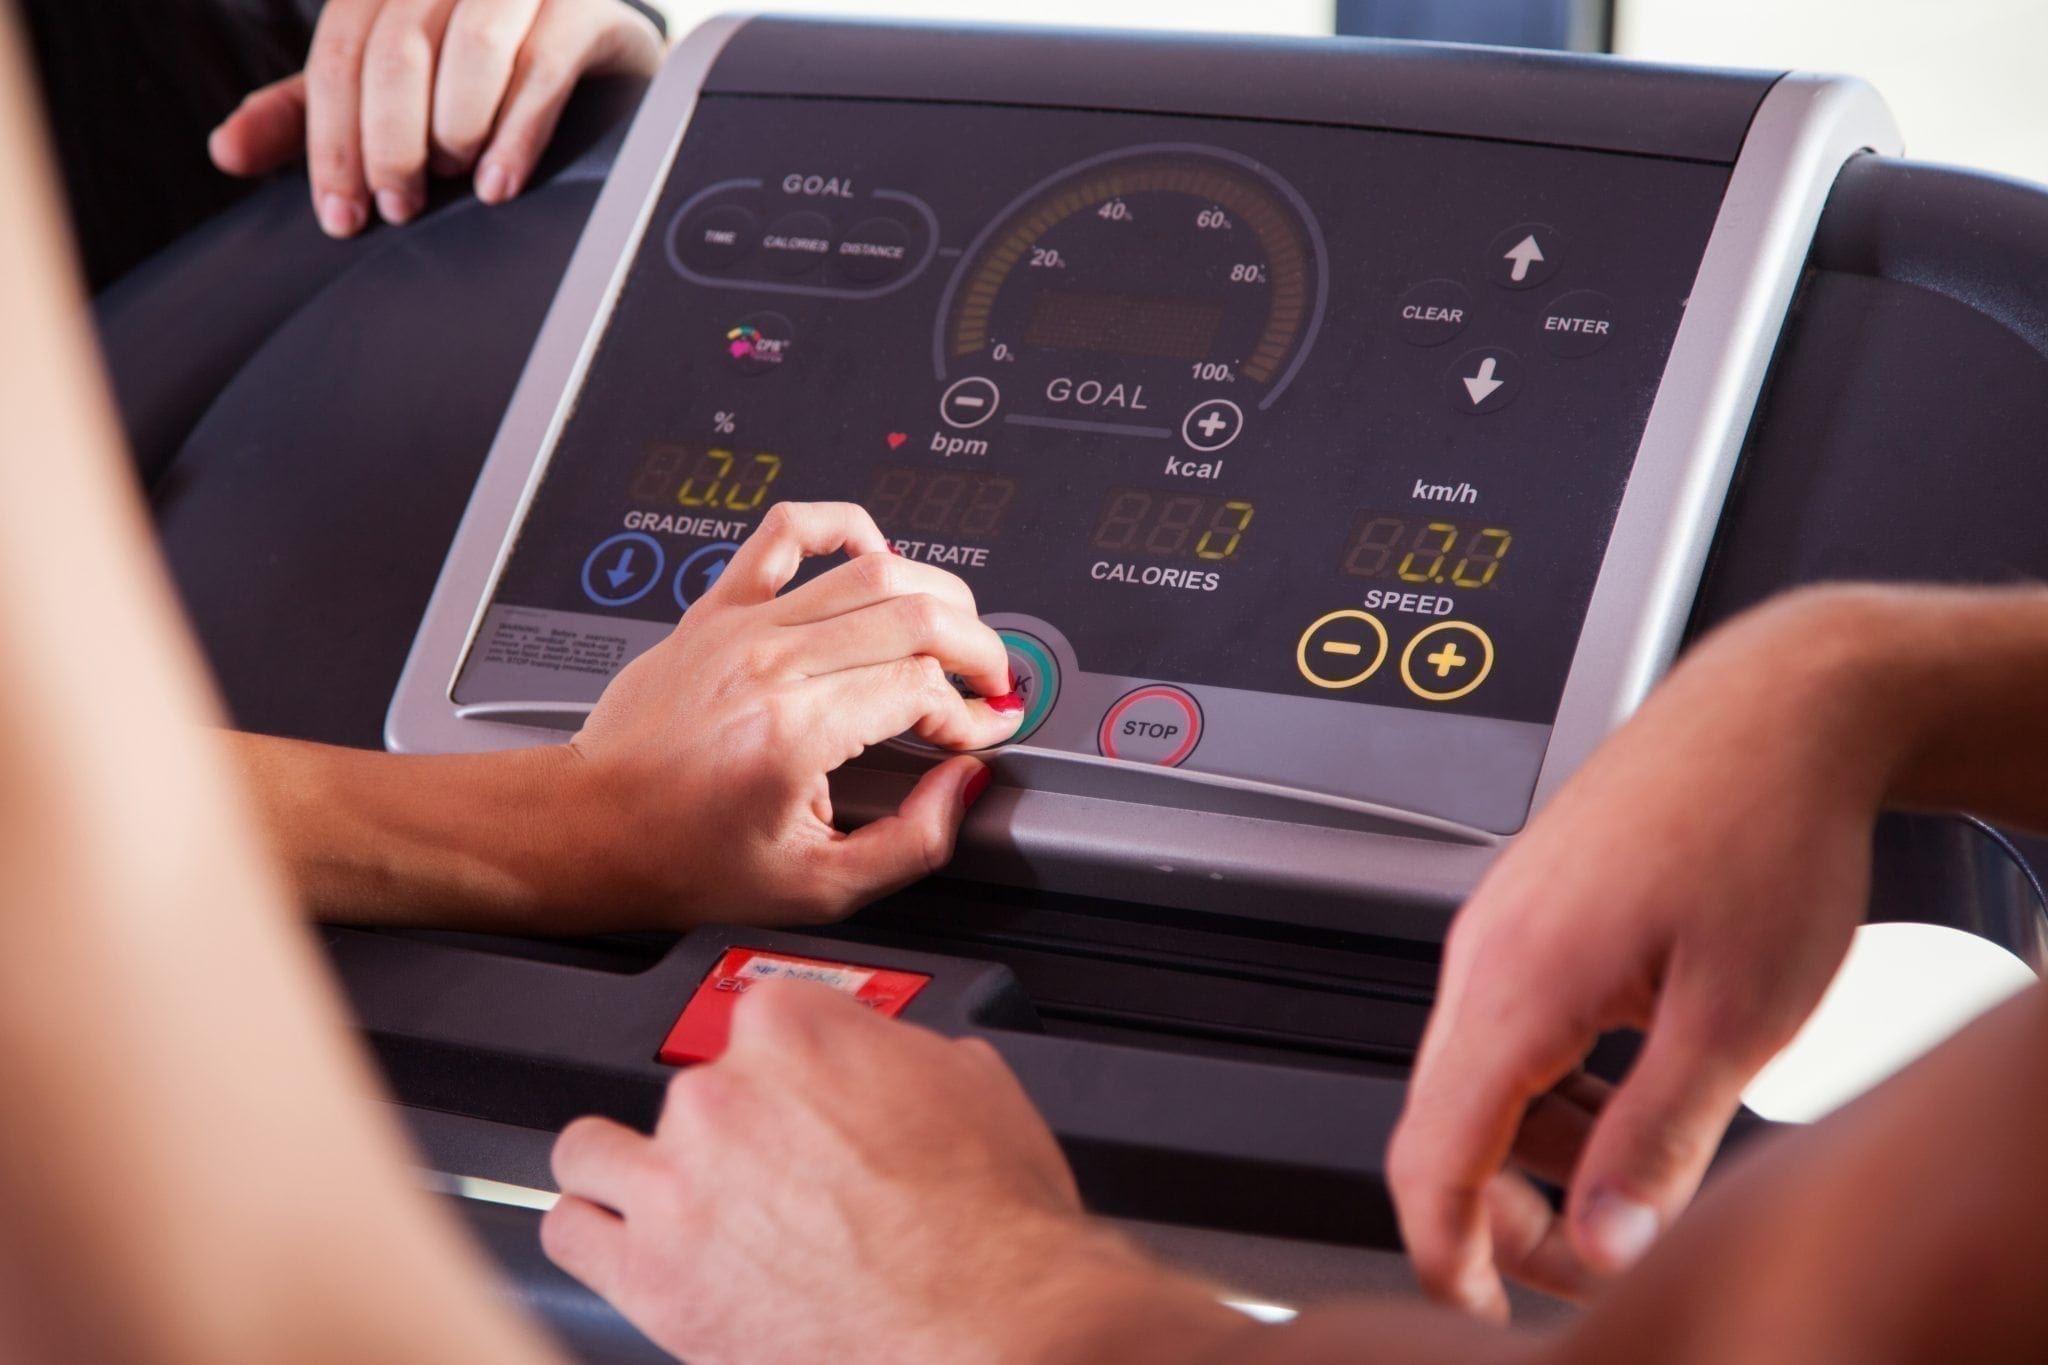 How Accurate Is The Treadmill Calorie Counter